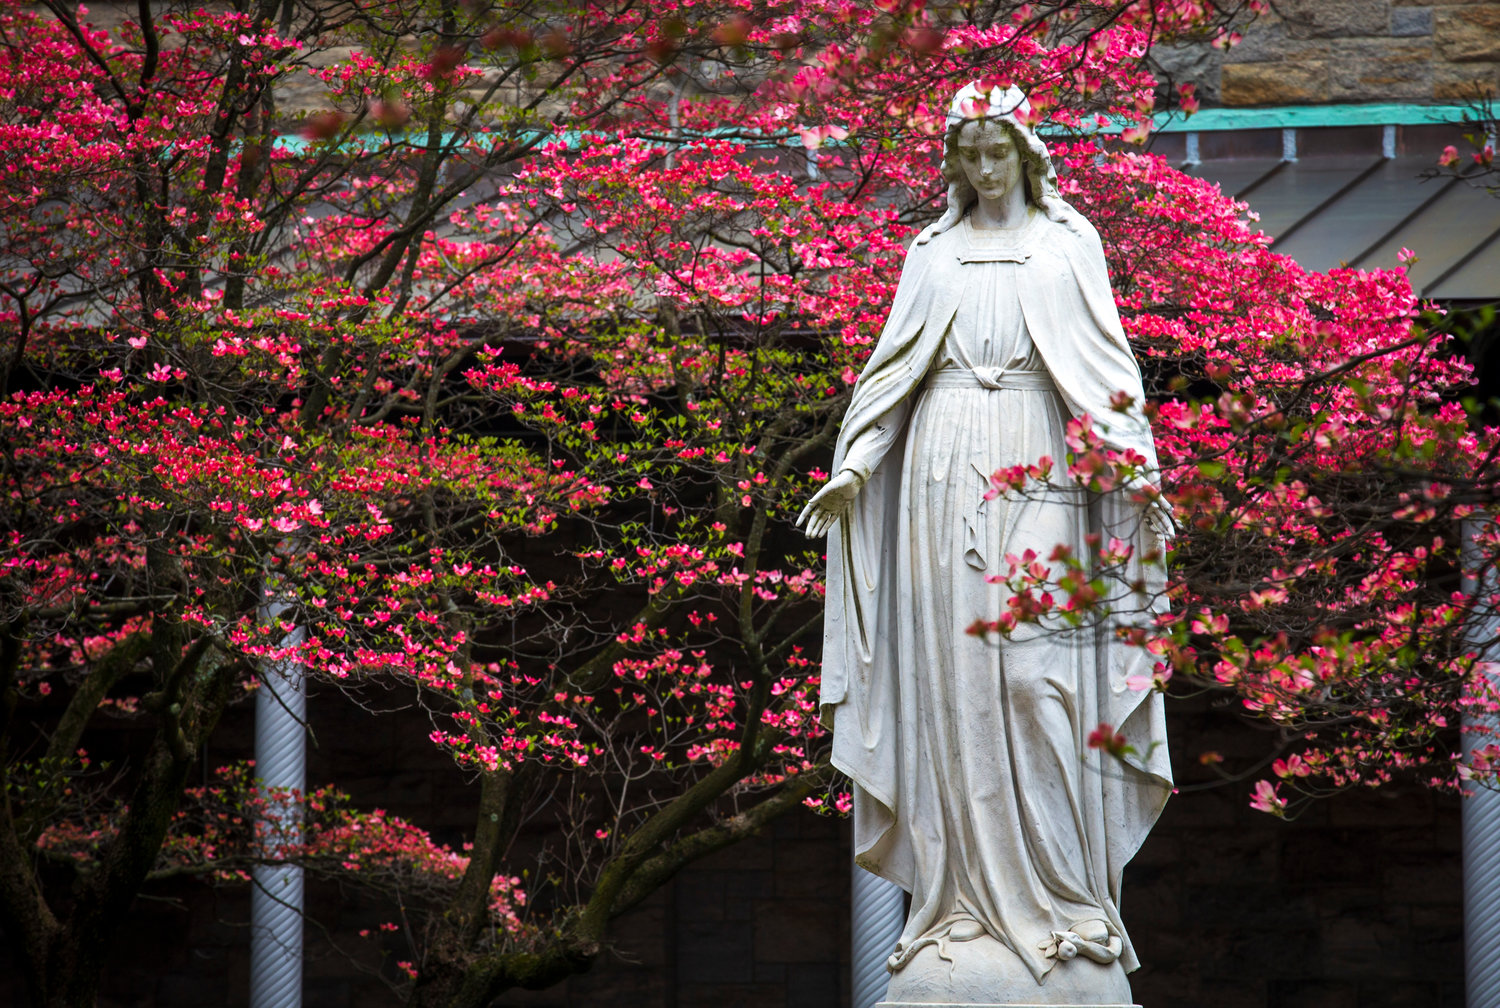 A statue of Mary is visible among the vivid spring buddings May 1, 2019, at St. Joseph’s Seminary in Yonkers, N.Y. The U.S. and Canadian bishops announced April 23, 2020, they will consecrate their nations to Mary during the coronavirus pandemic May 1.